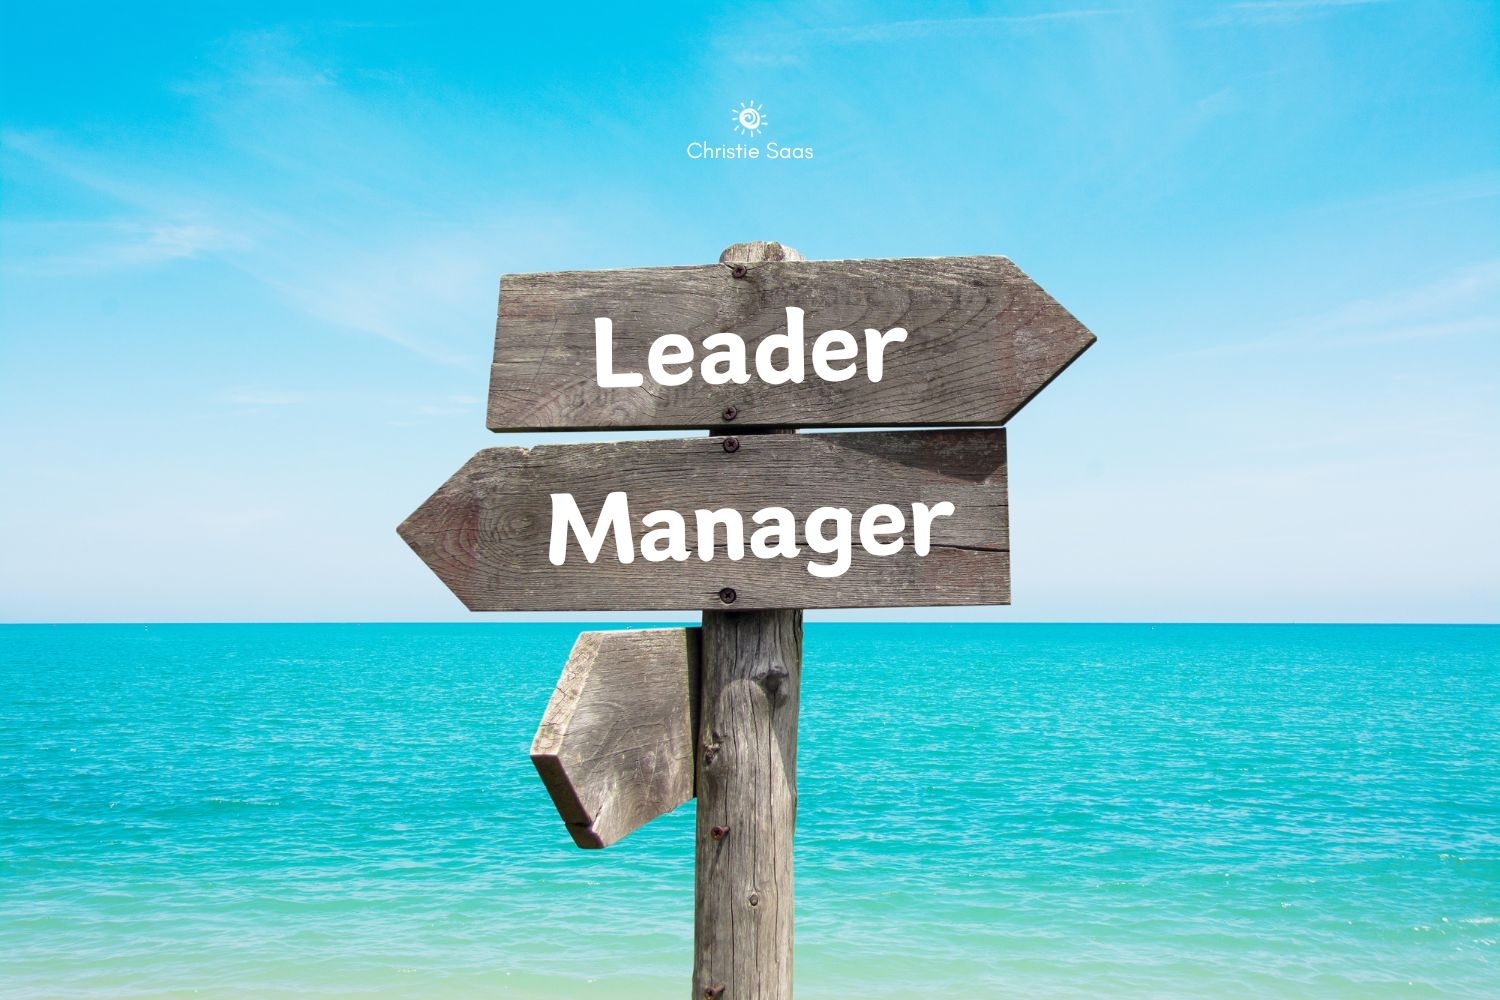 Are you a leader or a manager?